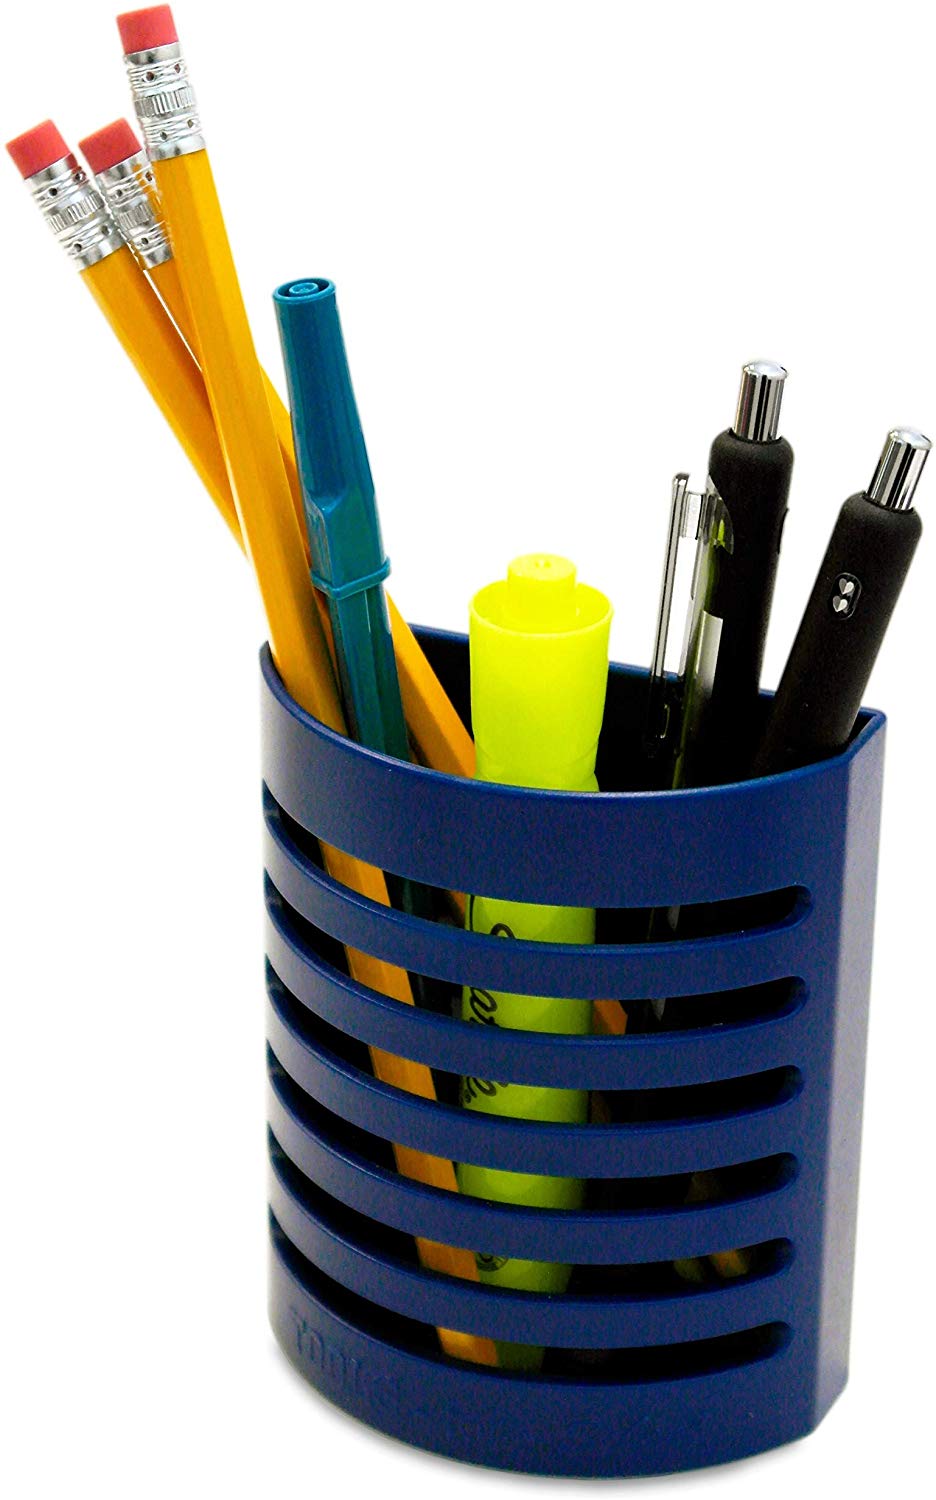 Magnetic Pencil Holder – Tools for School